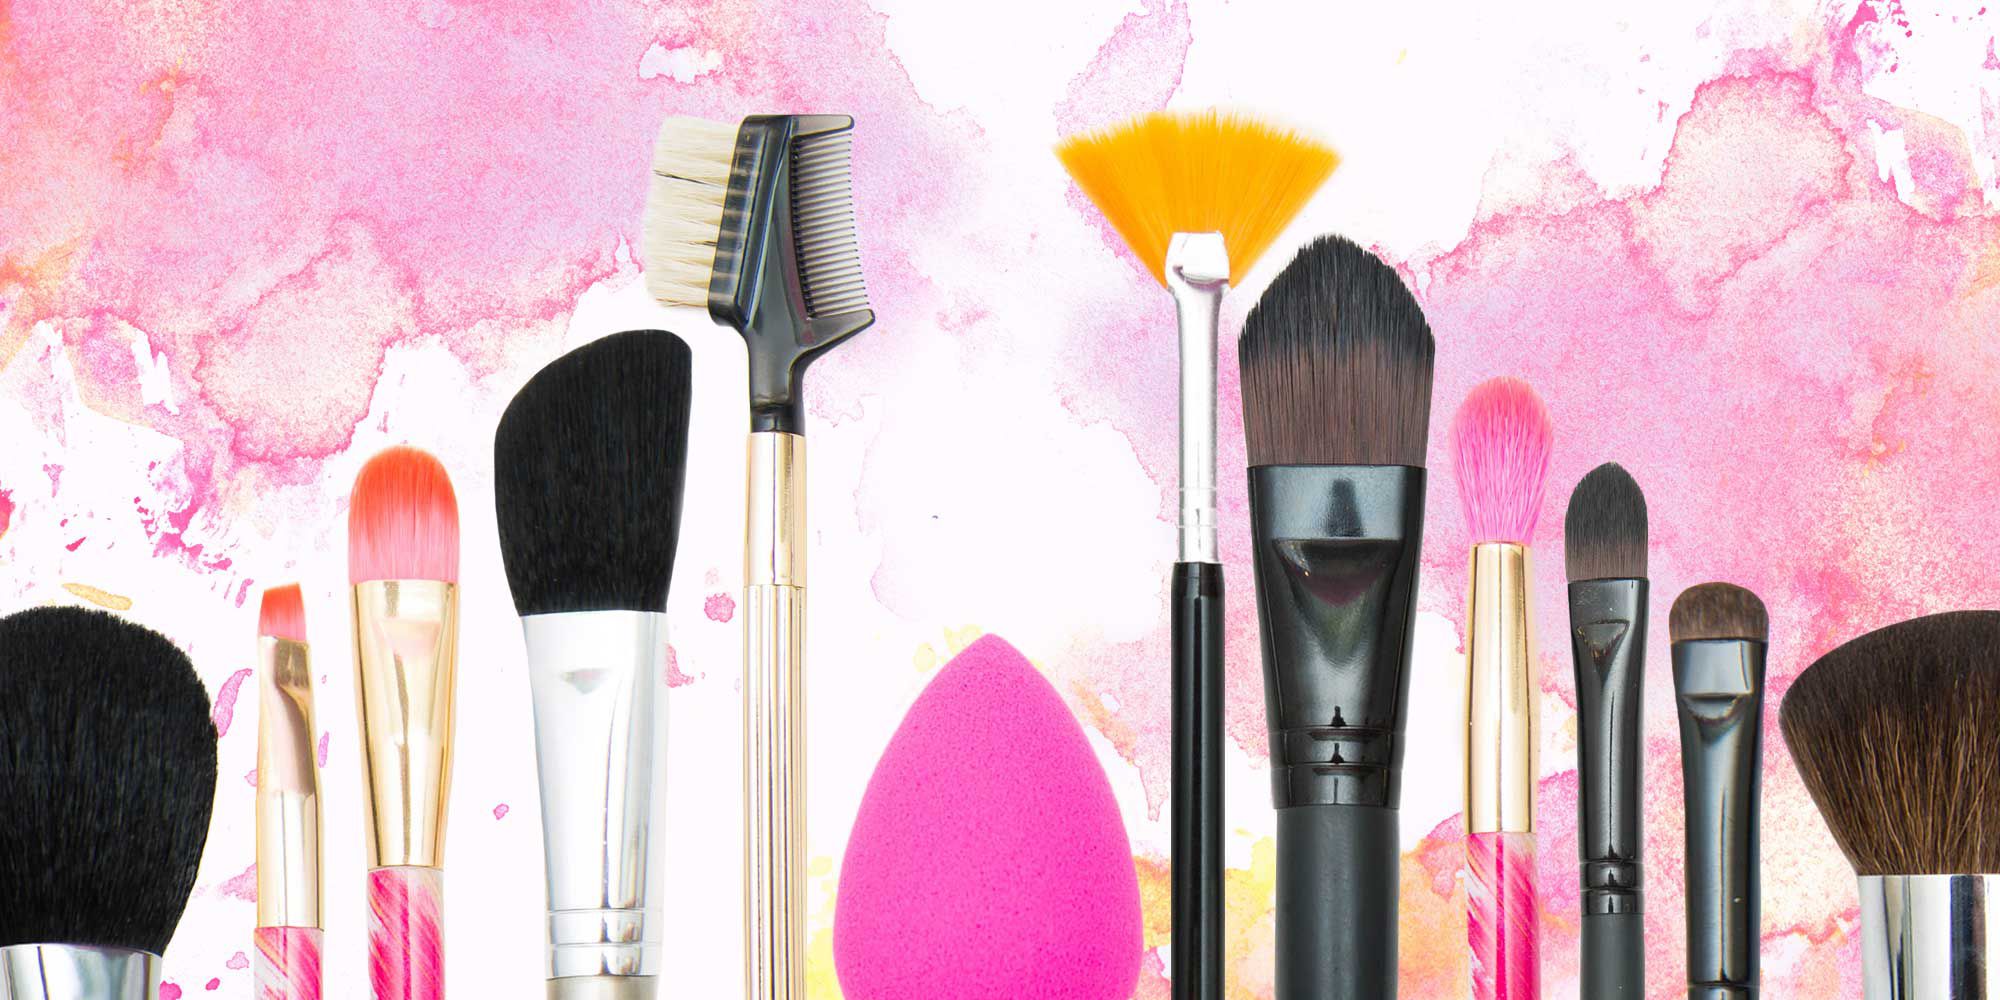 12 Makeup Brushes You Need and How to Use Them - Build Your Own ...